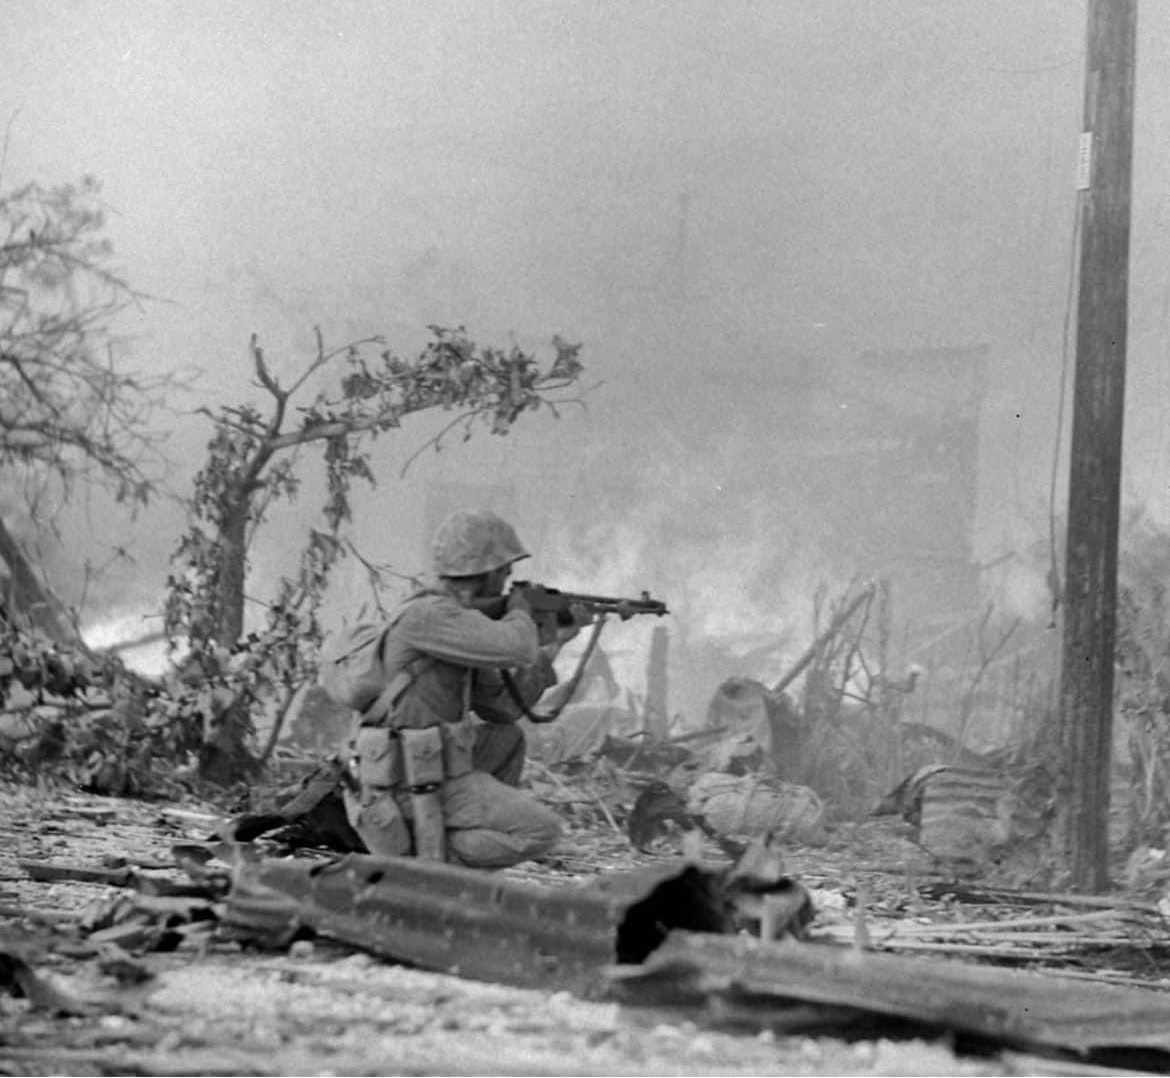 During heavy fighting on Saipan, a Marine takes aim at the enemy in the summer of 1944. 🪖